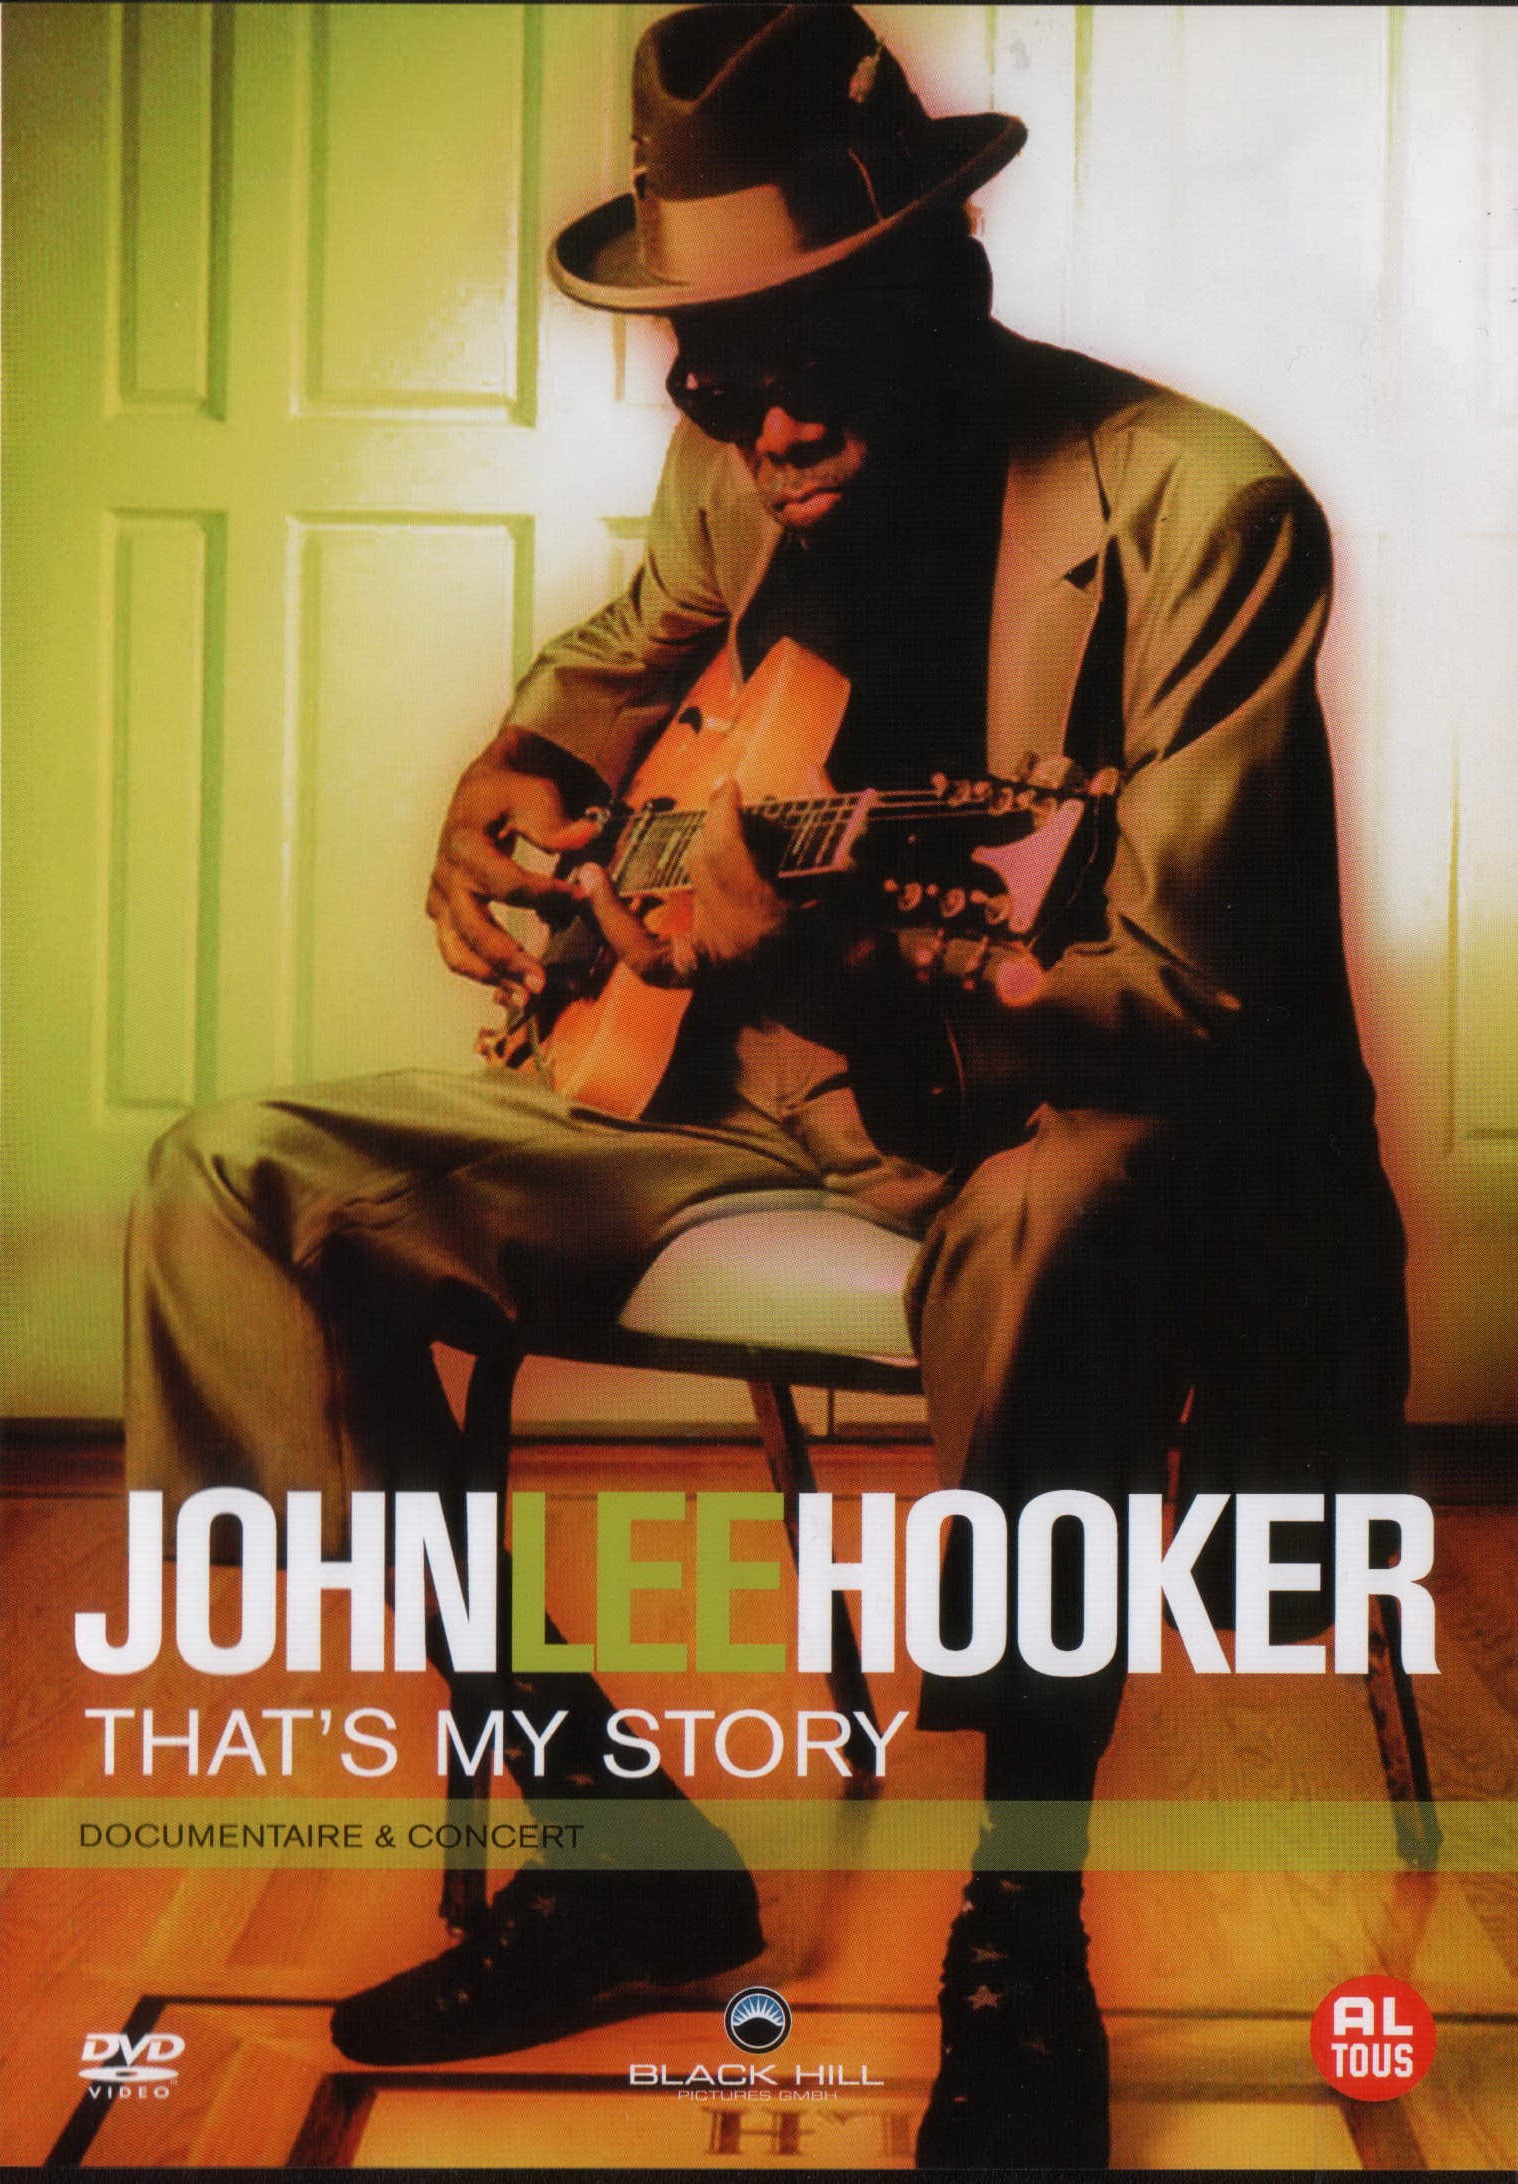 John Lee Hooker - That's My Story (2005) (Documentary And Concert) (DVD9)